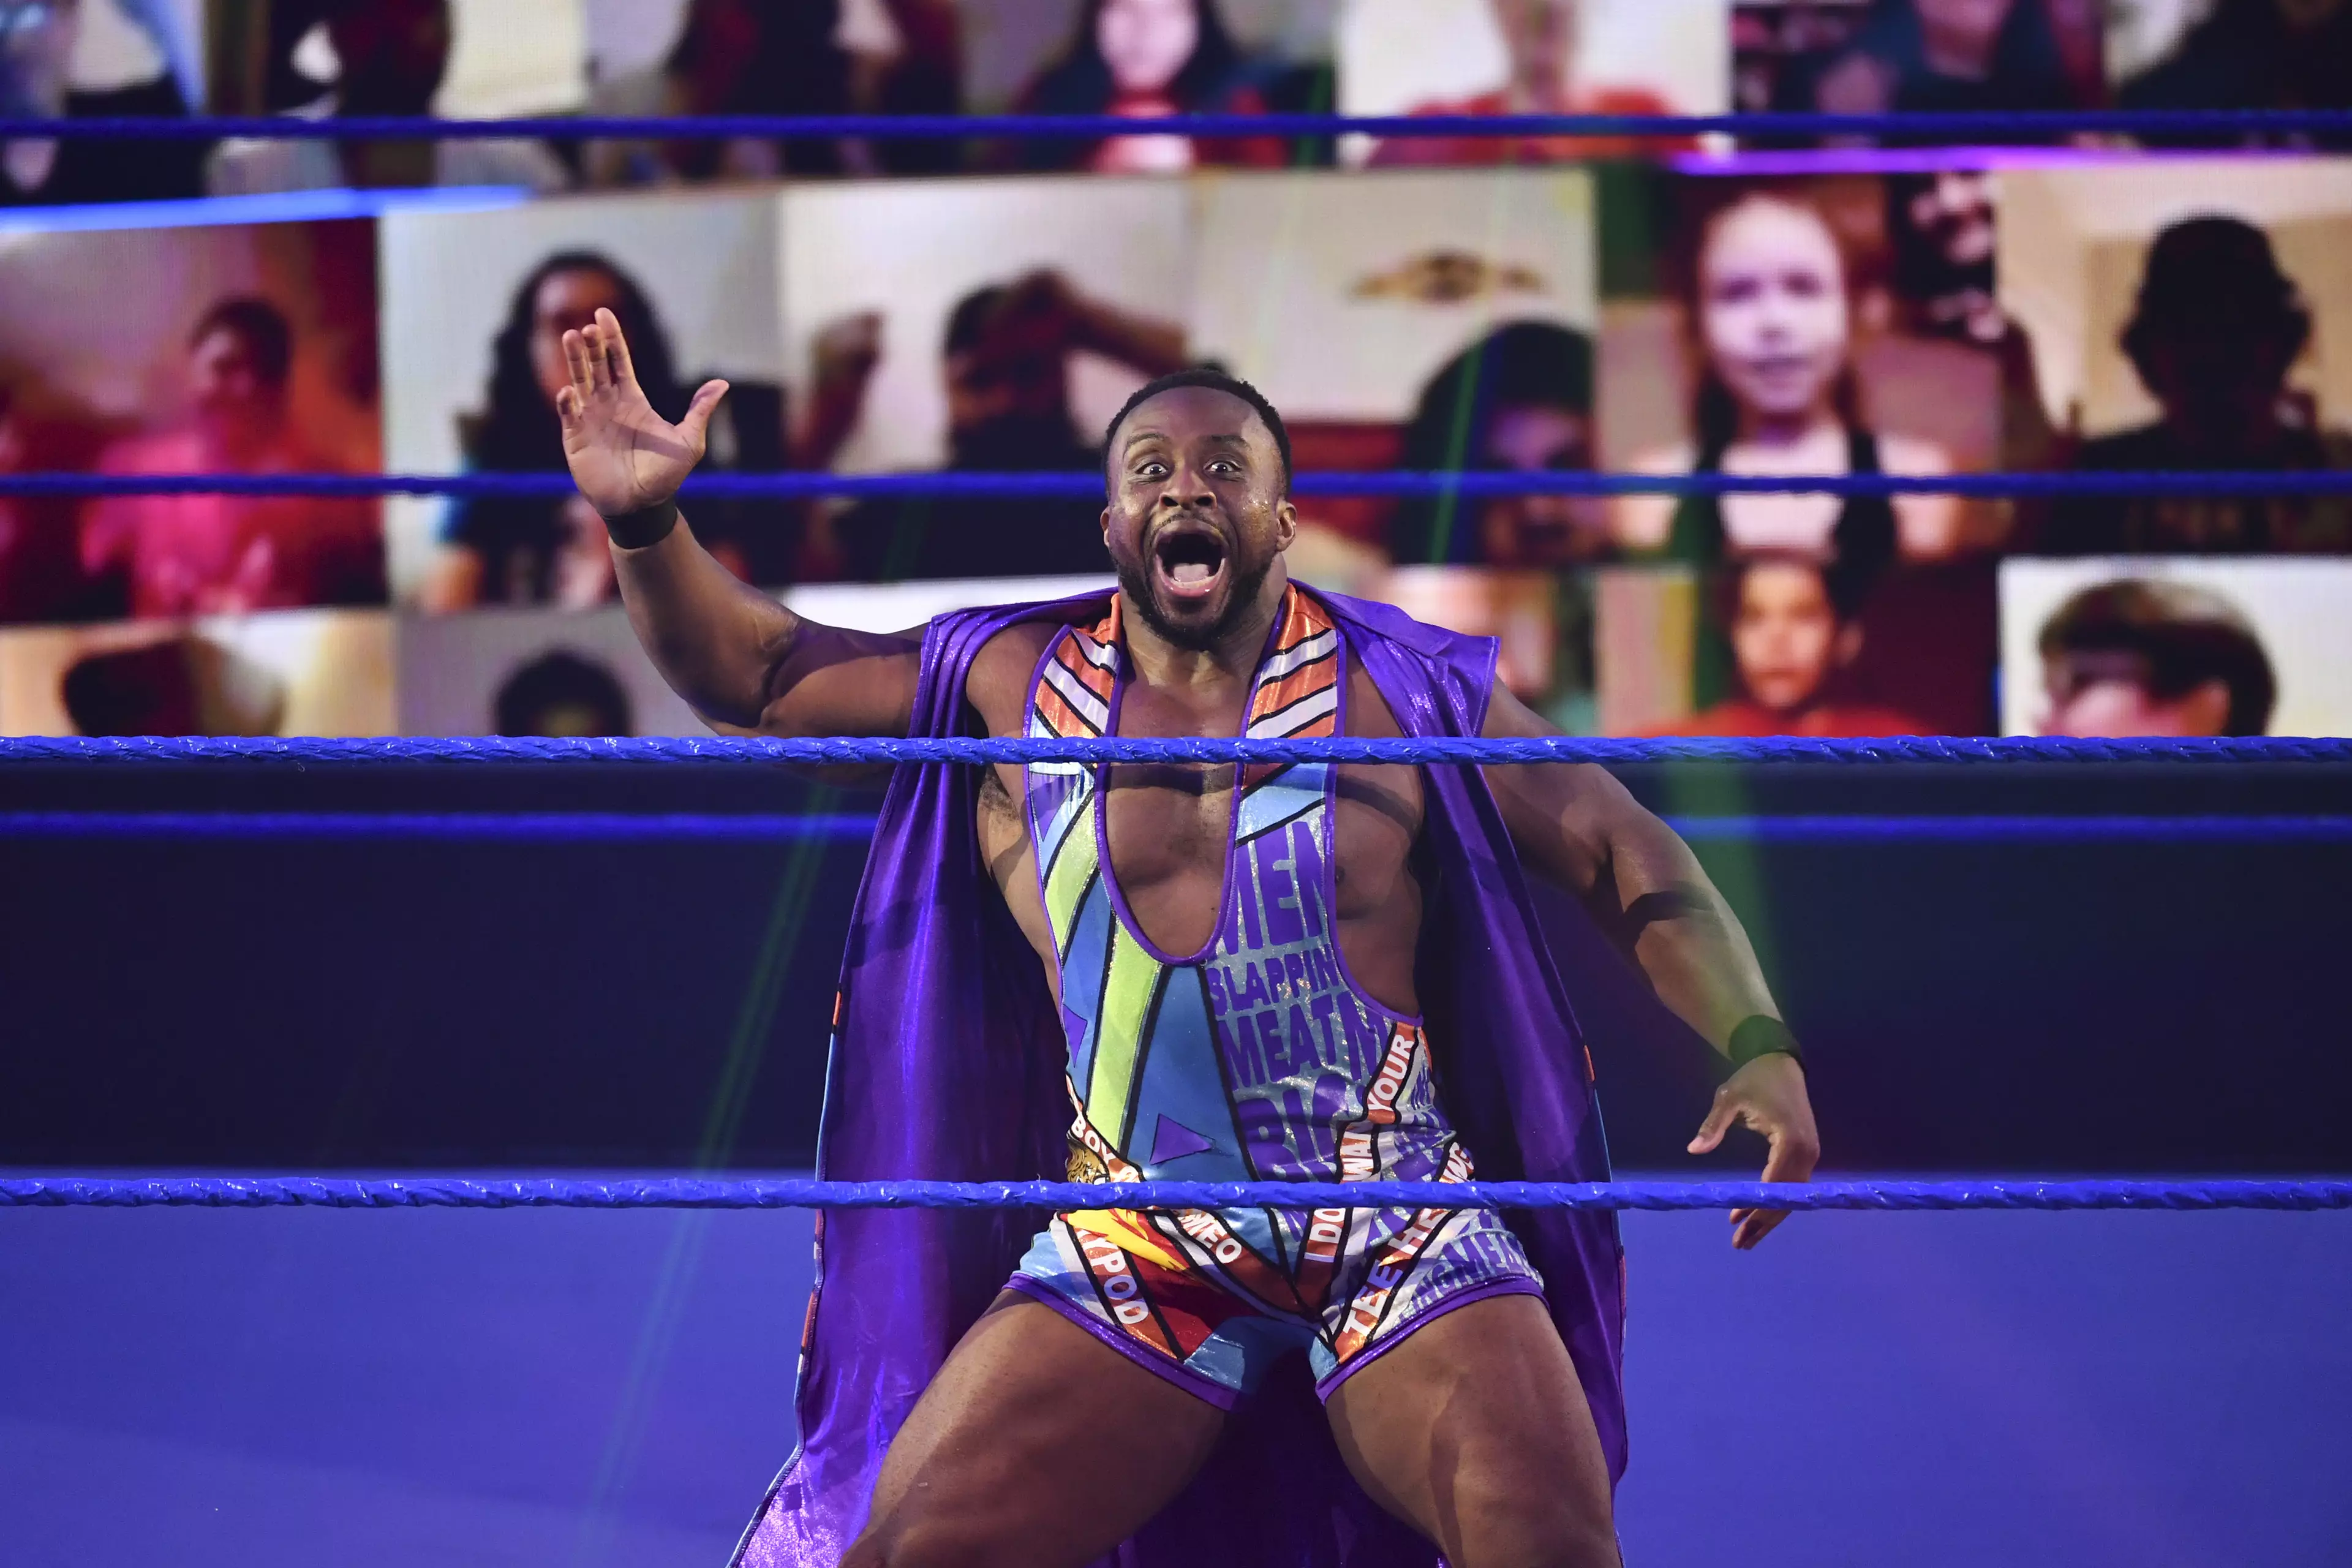 Big E has become a singles competitor over the last few months. (Image